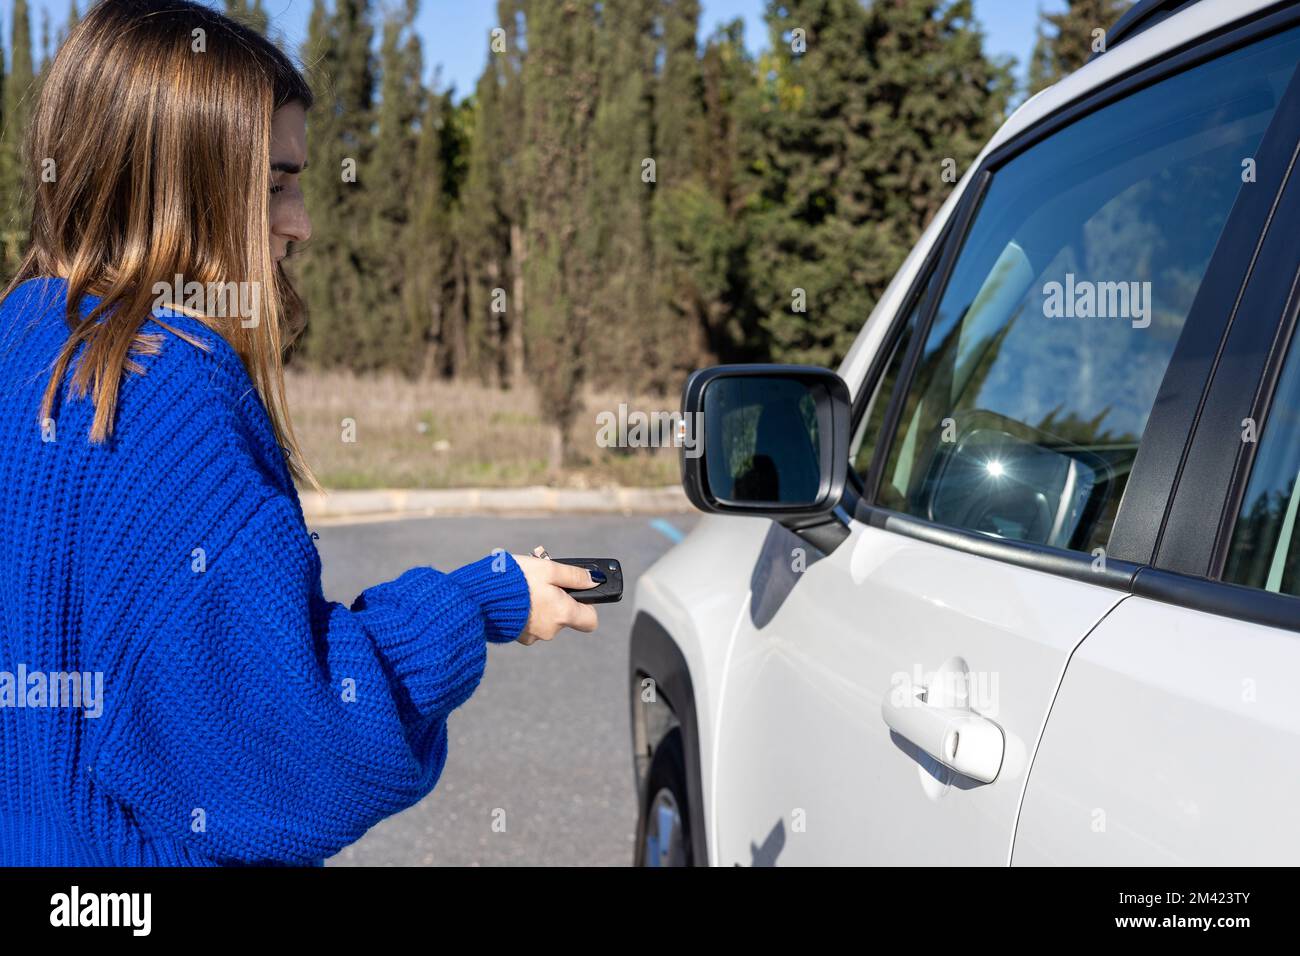 women hand presses on the remote control car alarm systems.Women hand pressing the button on the remote to lock or unlock the red car, travel concept Stock Photo